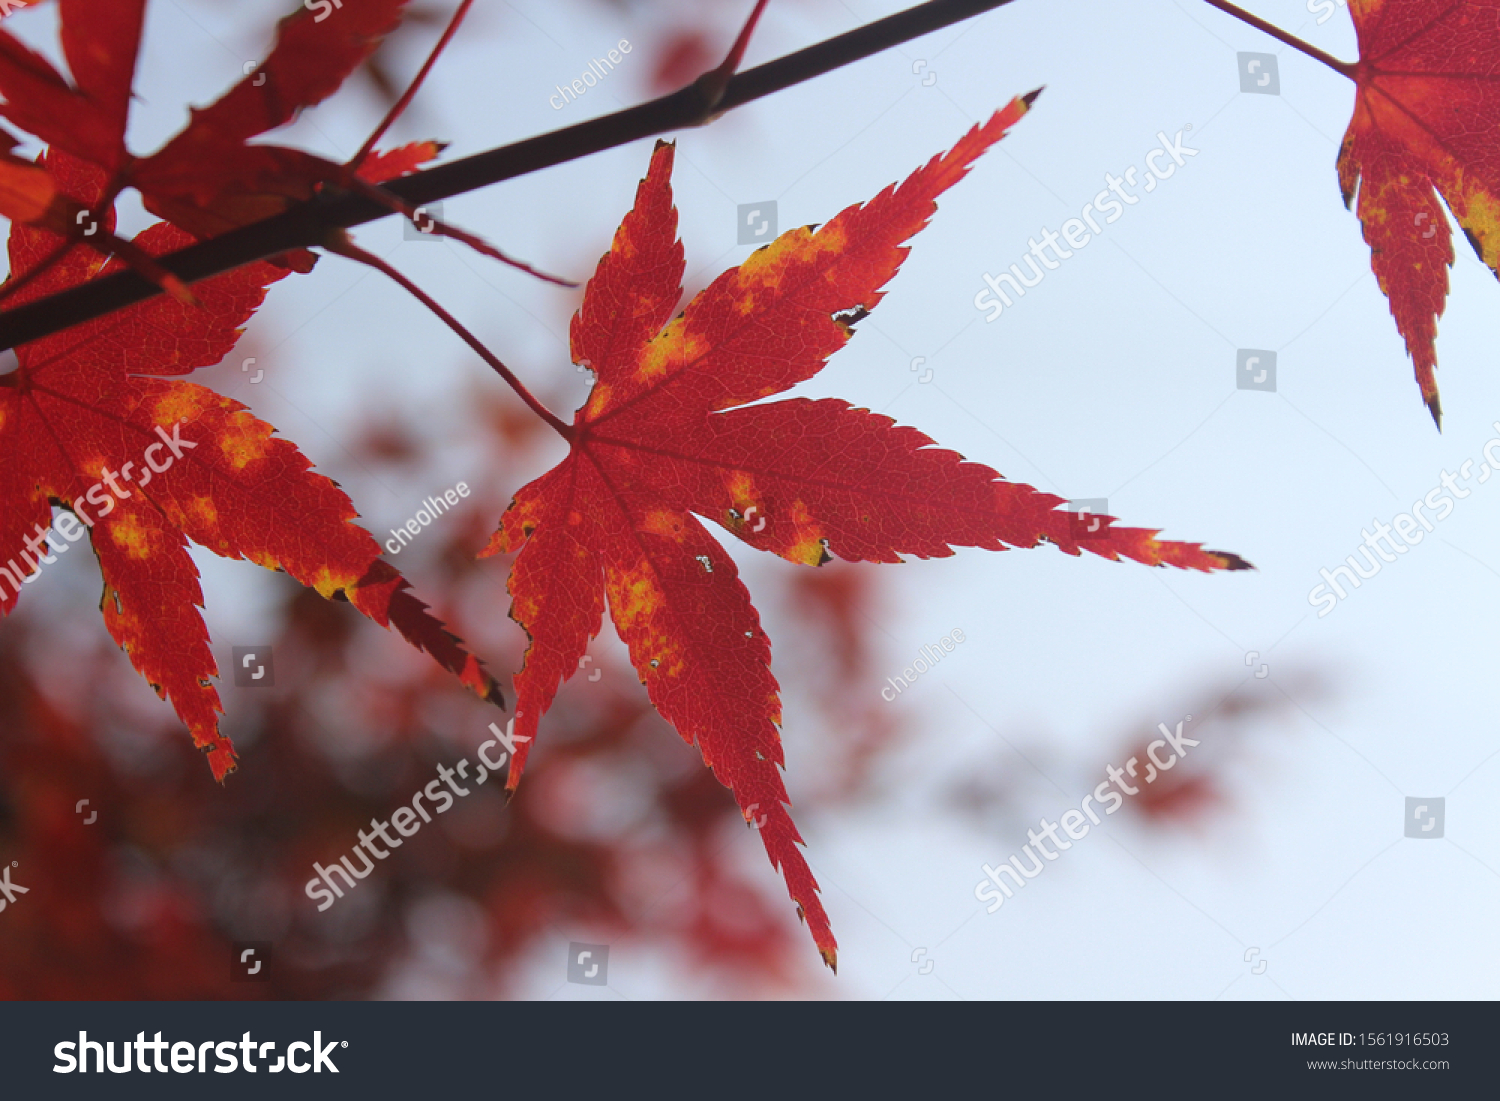 the red color maple in autumn #1561916503